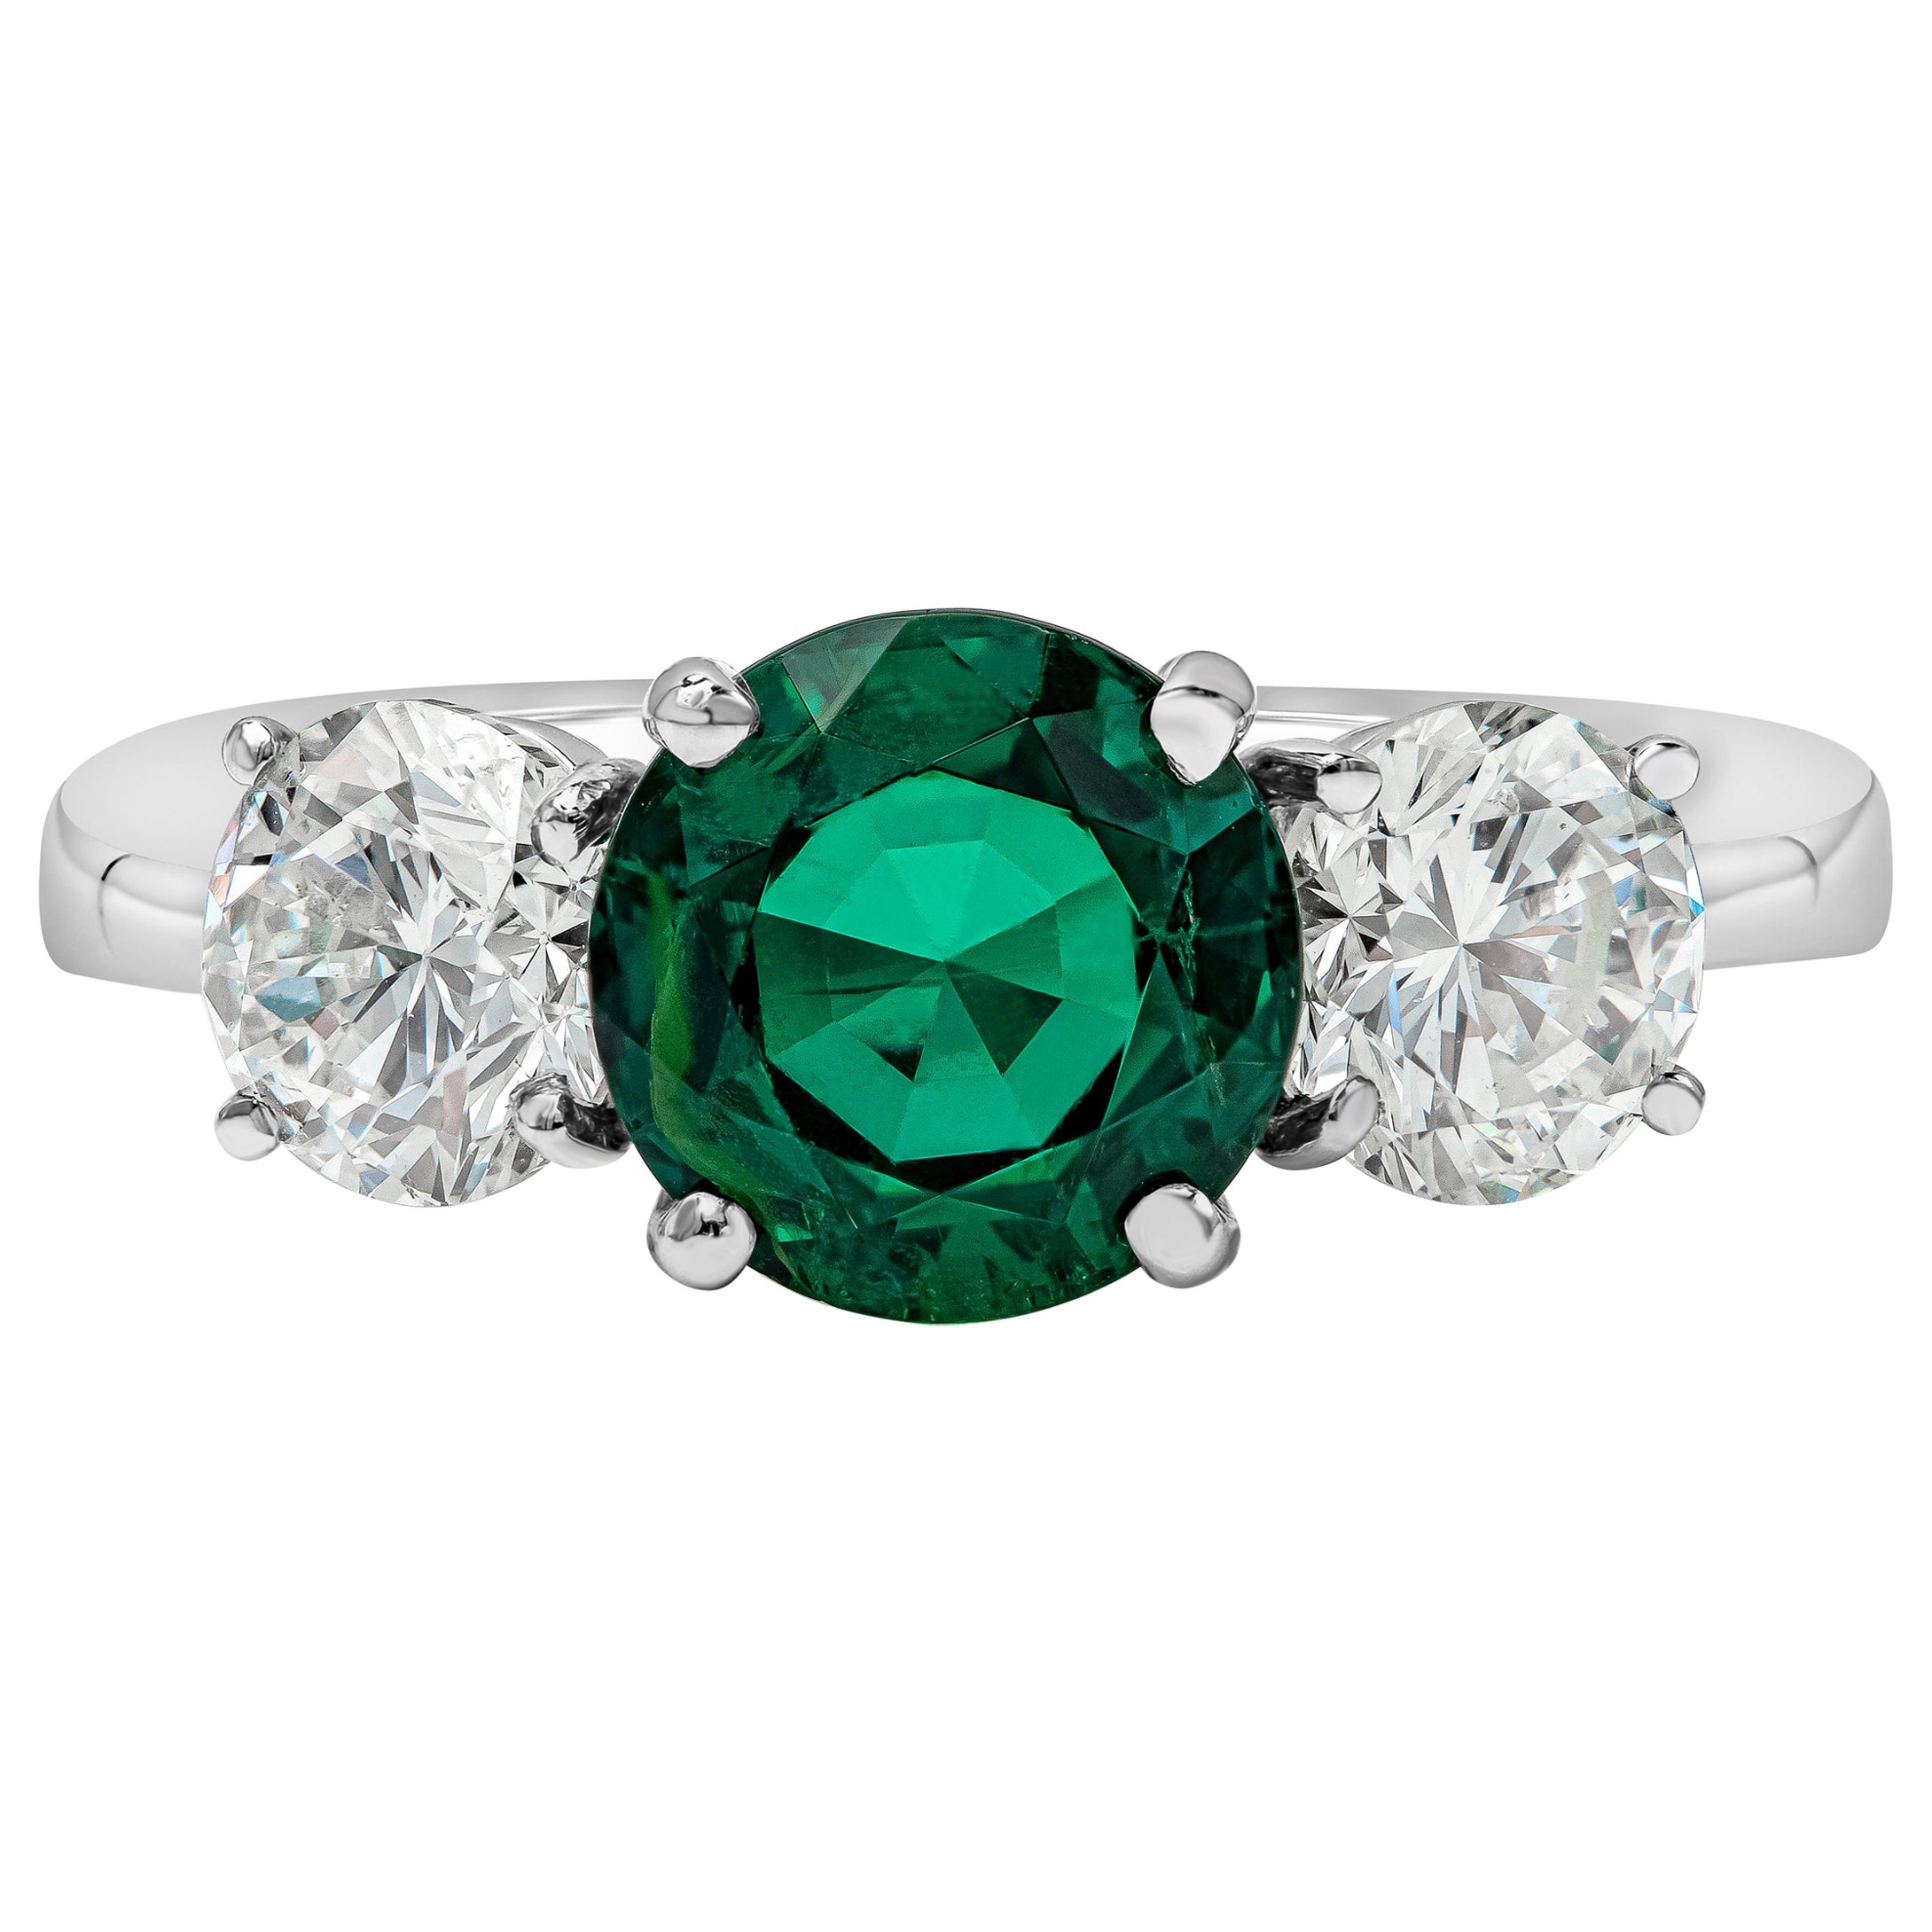 1.87 Carat Round Cut Rare Russian Green Emerald and Diamond Engagement Ring